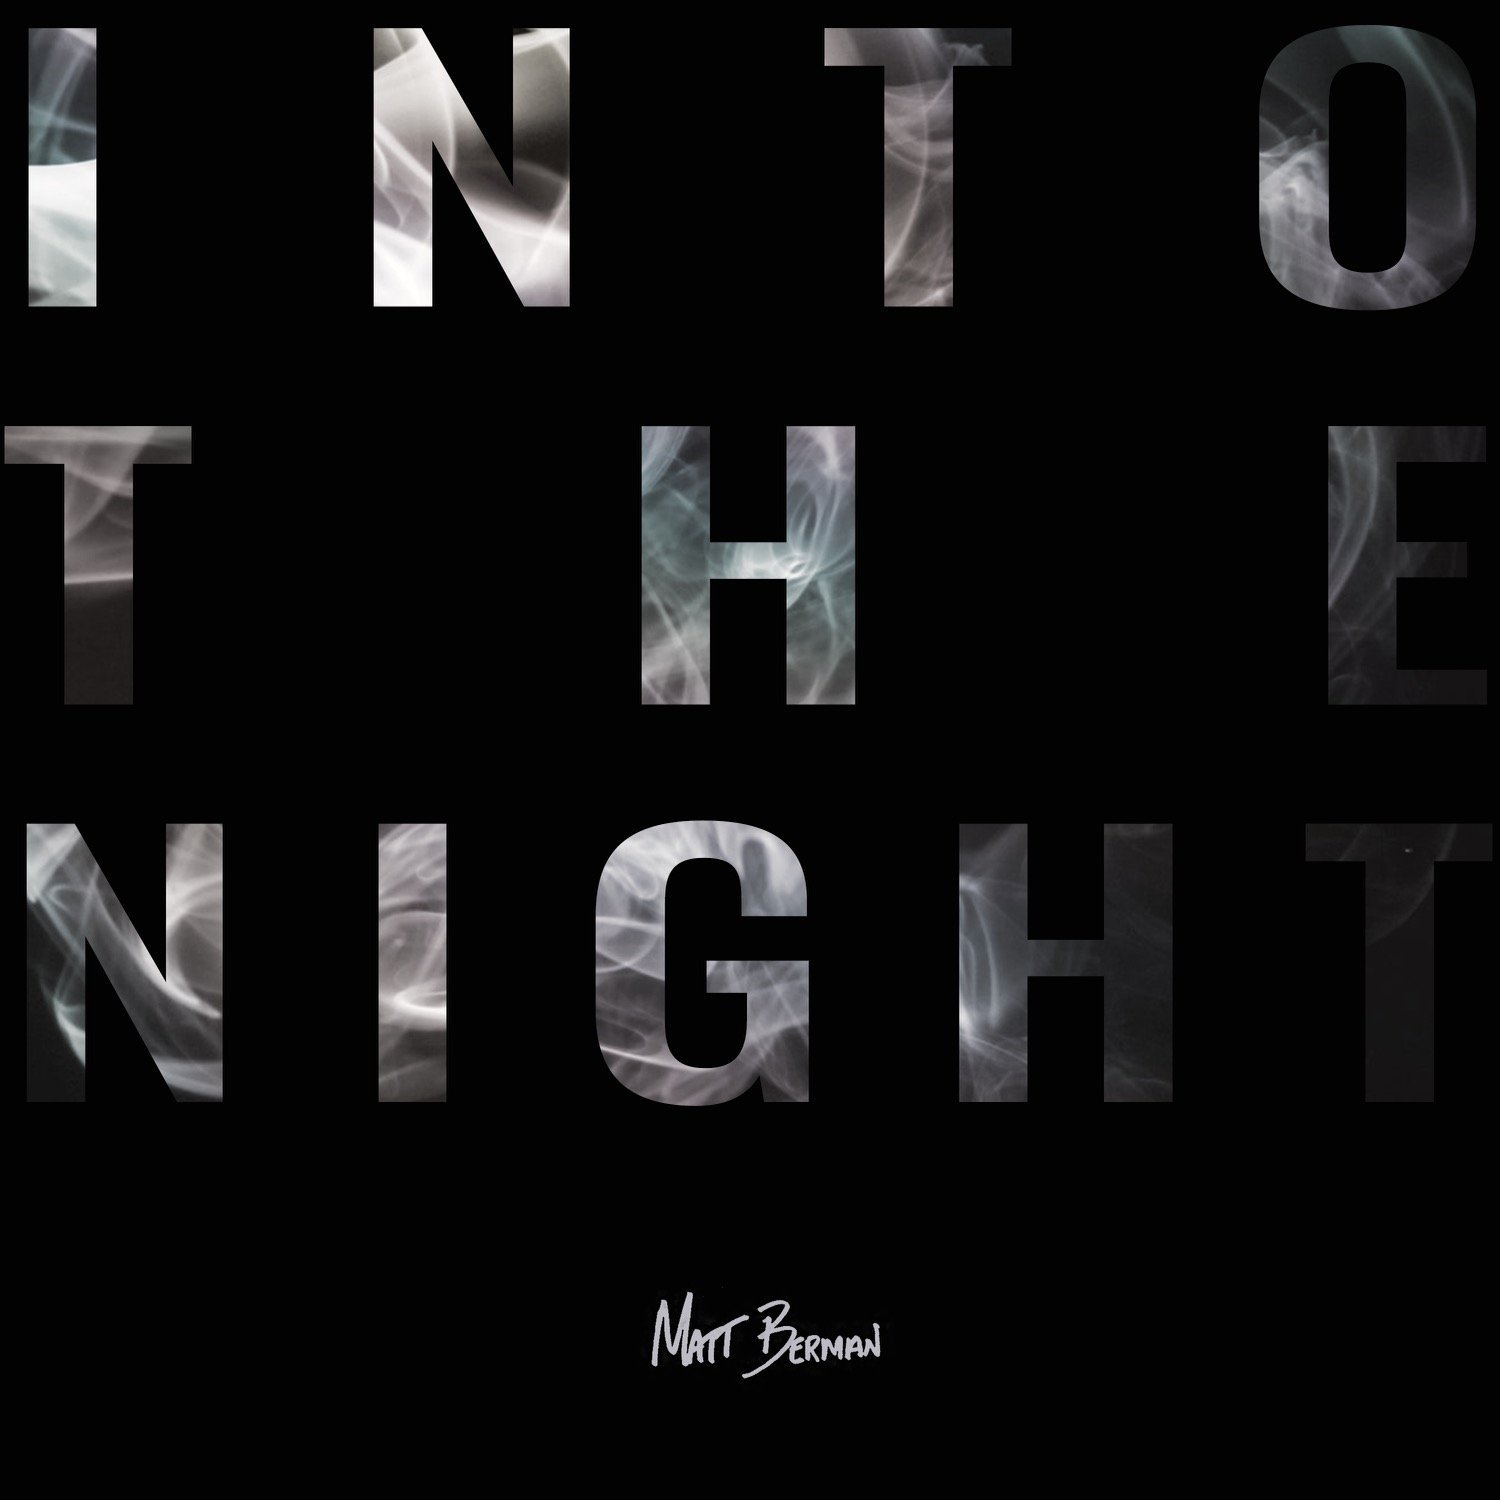 Into The Night